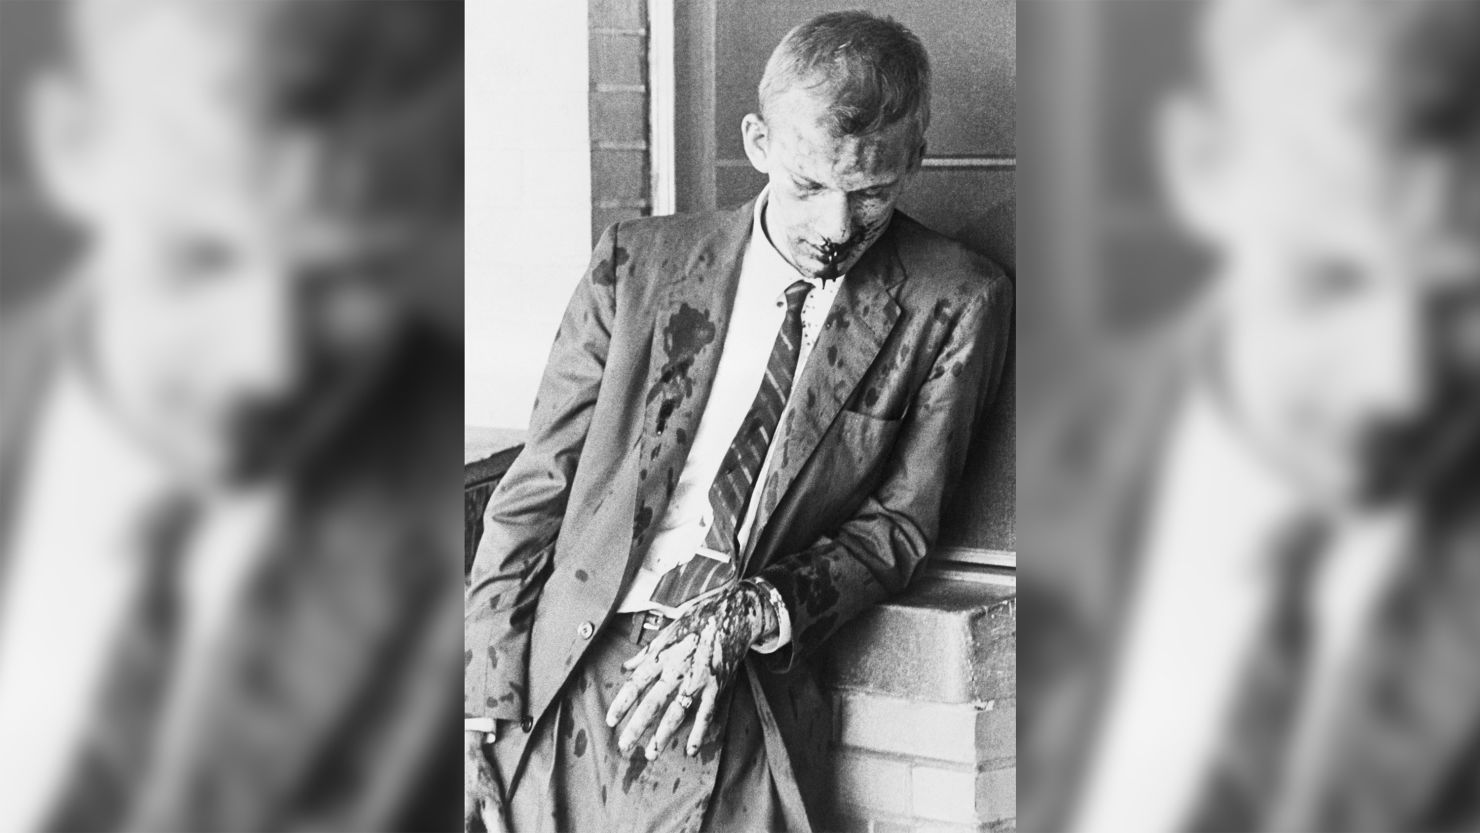 Freedom Rider James Zwerg stands bleeding after an attack by white pro-segregationists in Montgomery, Alabama, in 1961. Zwerg remained in the street for over an hour after the beating, since "white ambulances" refused to treat him.